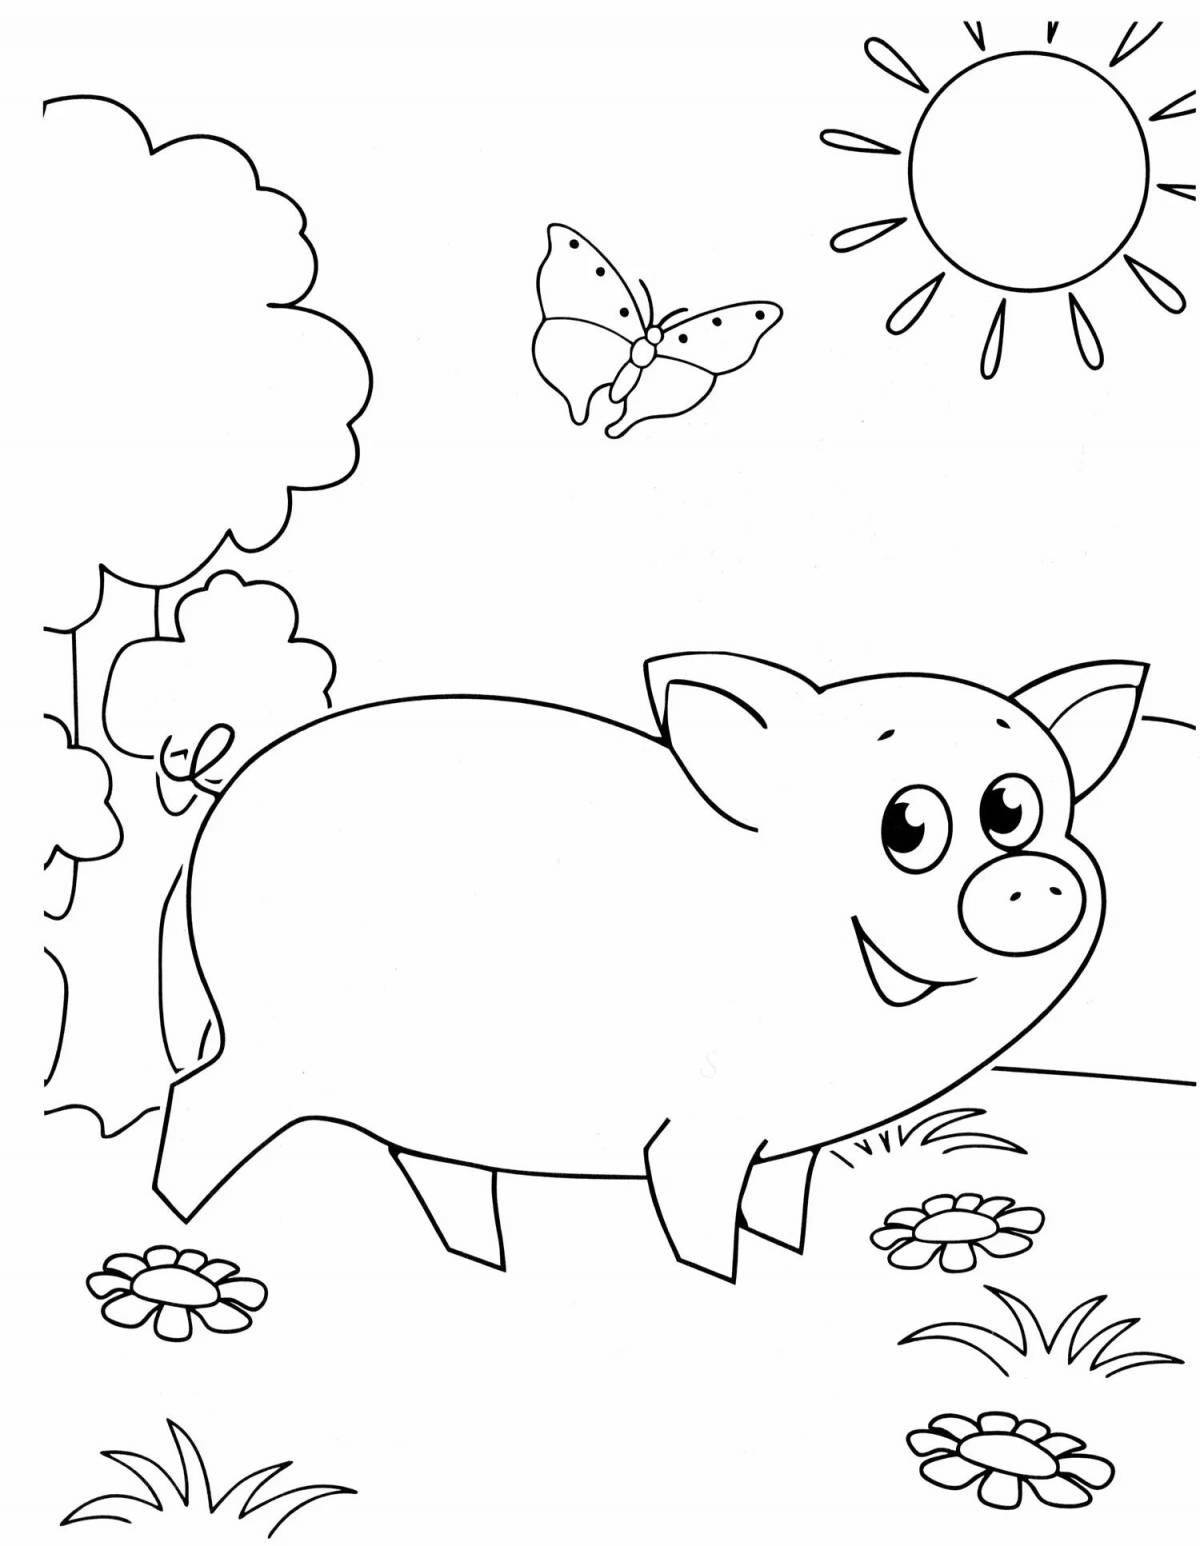 Coloring pig for children